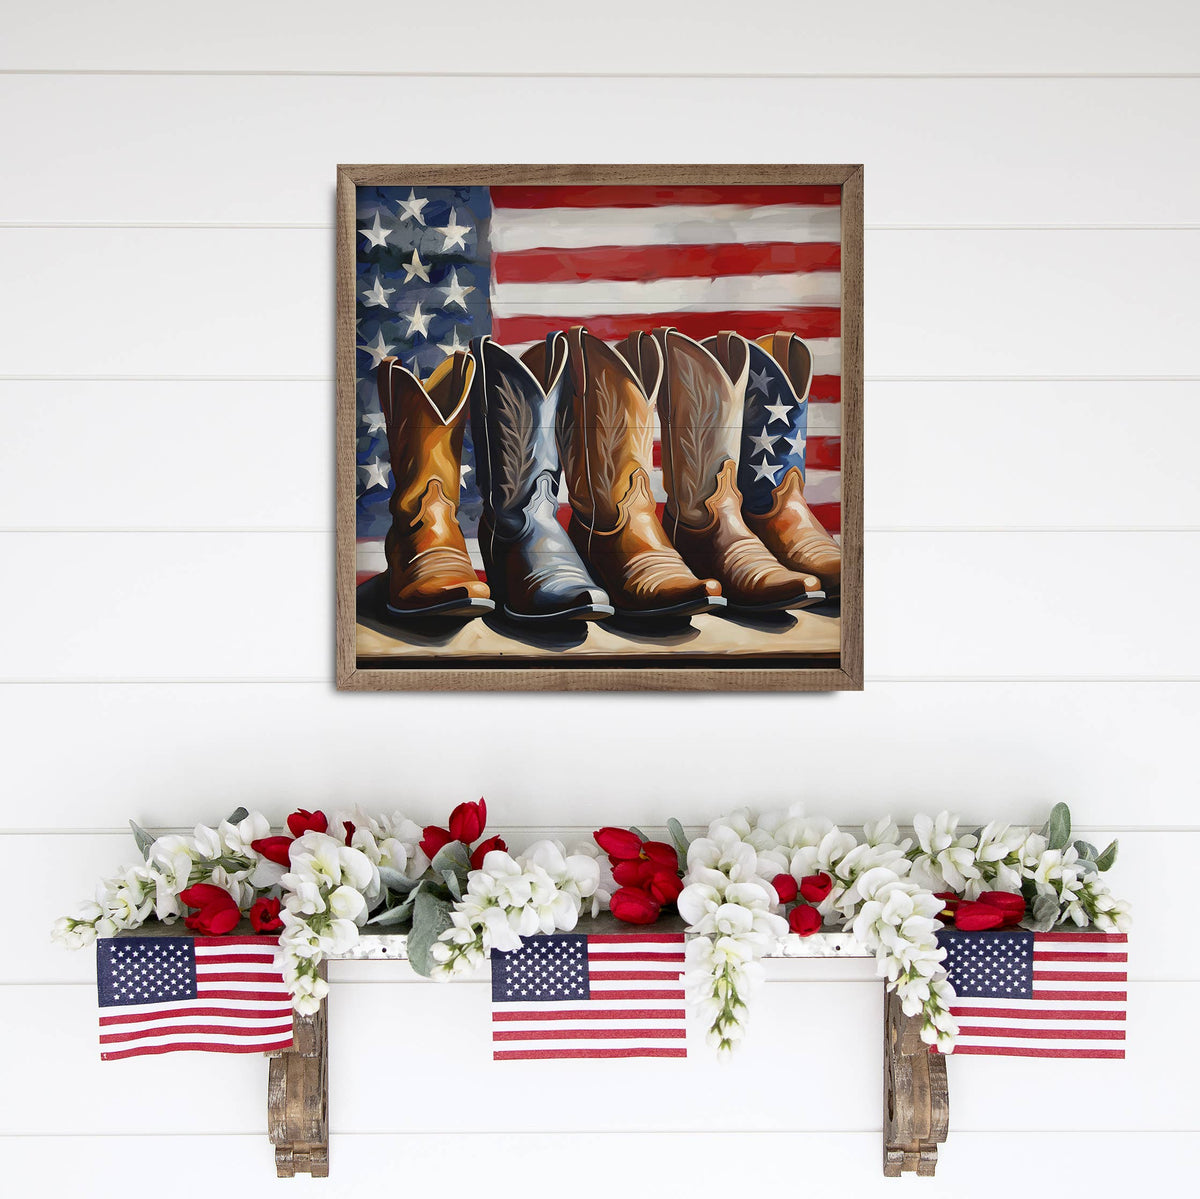 American Flag With Boots: 8x8